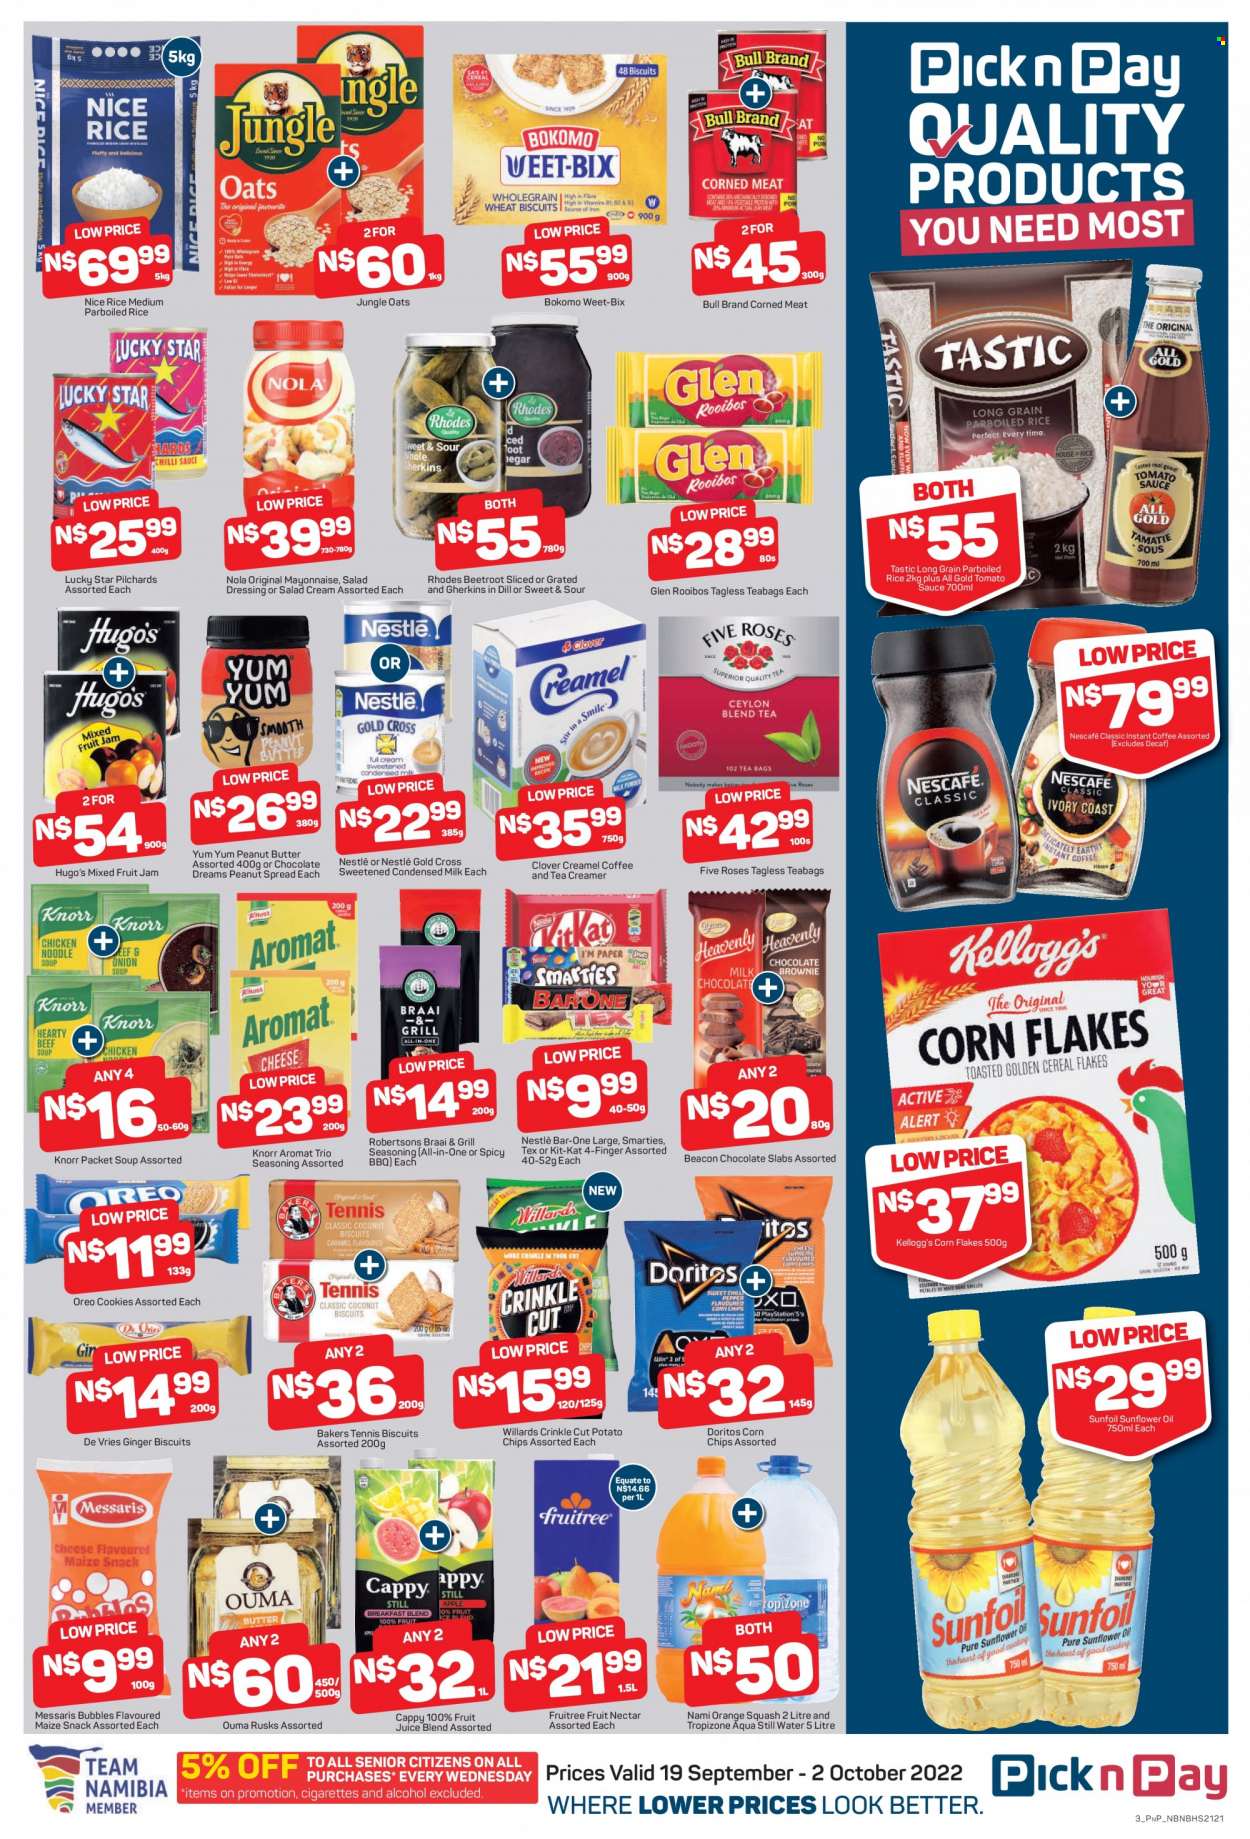 Pick n Pay catalogue  - 19/09/2022 - 02/10/2022 - Sales products - rusks, ginger, beetroot, sardines, soup, Knorr, sauce, Oreo, Clover, milk, condensed milk, creamer, coffee and tea creamer, salad cream, cookies, Nestlé, chocolate, snack, chocolate slabs, Smarties, cereal bar, Kellogg's, biscuit, Doritos, potato chips, chips, corn chips, maize snack, oats, tomato sauce, corned meat, corn flakes, Weet-Bix, jungle oats, rice, parboiled rice, Tastic, dill, spice, salad dressing, dressing, sunflower oil, oil, jam, peanut butter, fruit juice, juice, fruit nectar, orange squash, mineral water, bottled water, tea, tea bags, rooibos tea, instant coffee, Nescafé, alcohol, Bakers. Page 4.